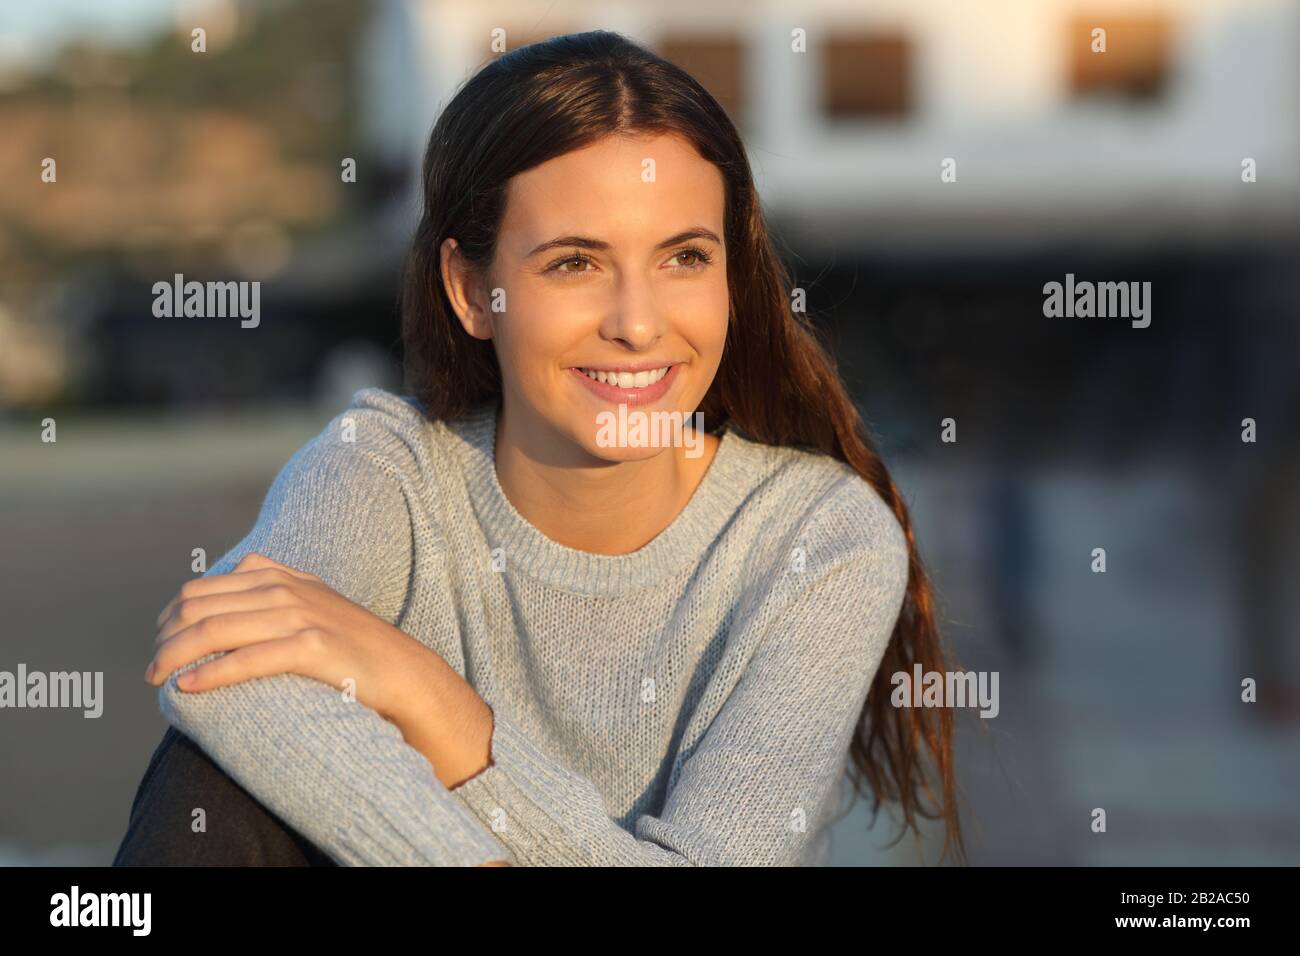 Portrait of a happy teenage girl smiling looking away at sunset in a town Stock Photo